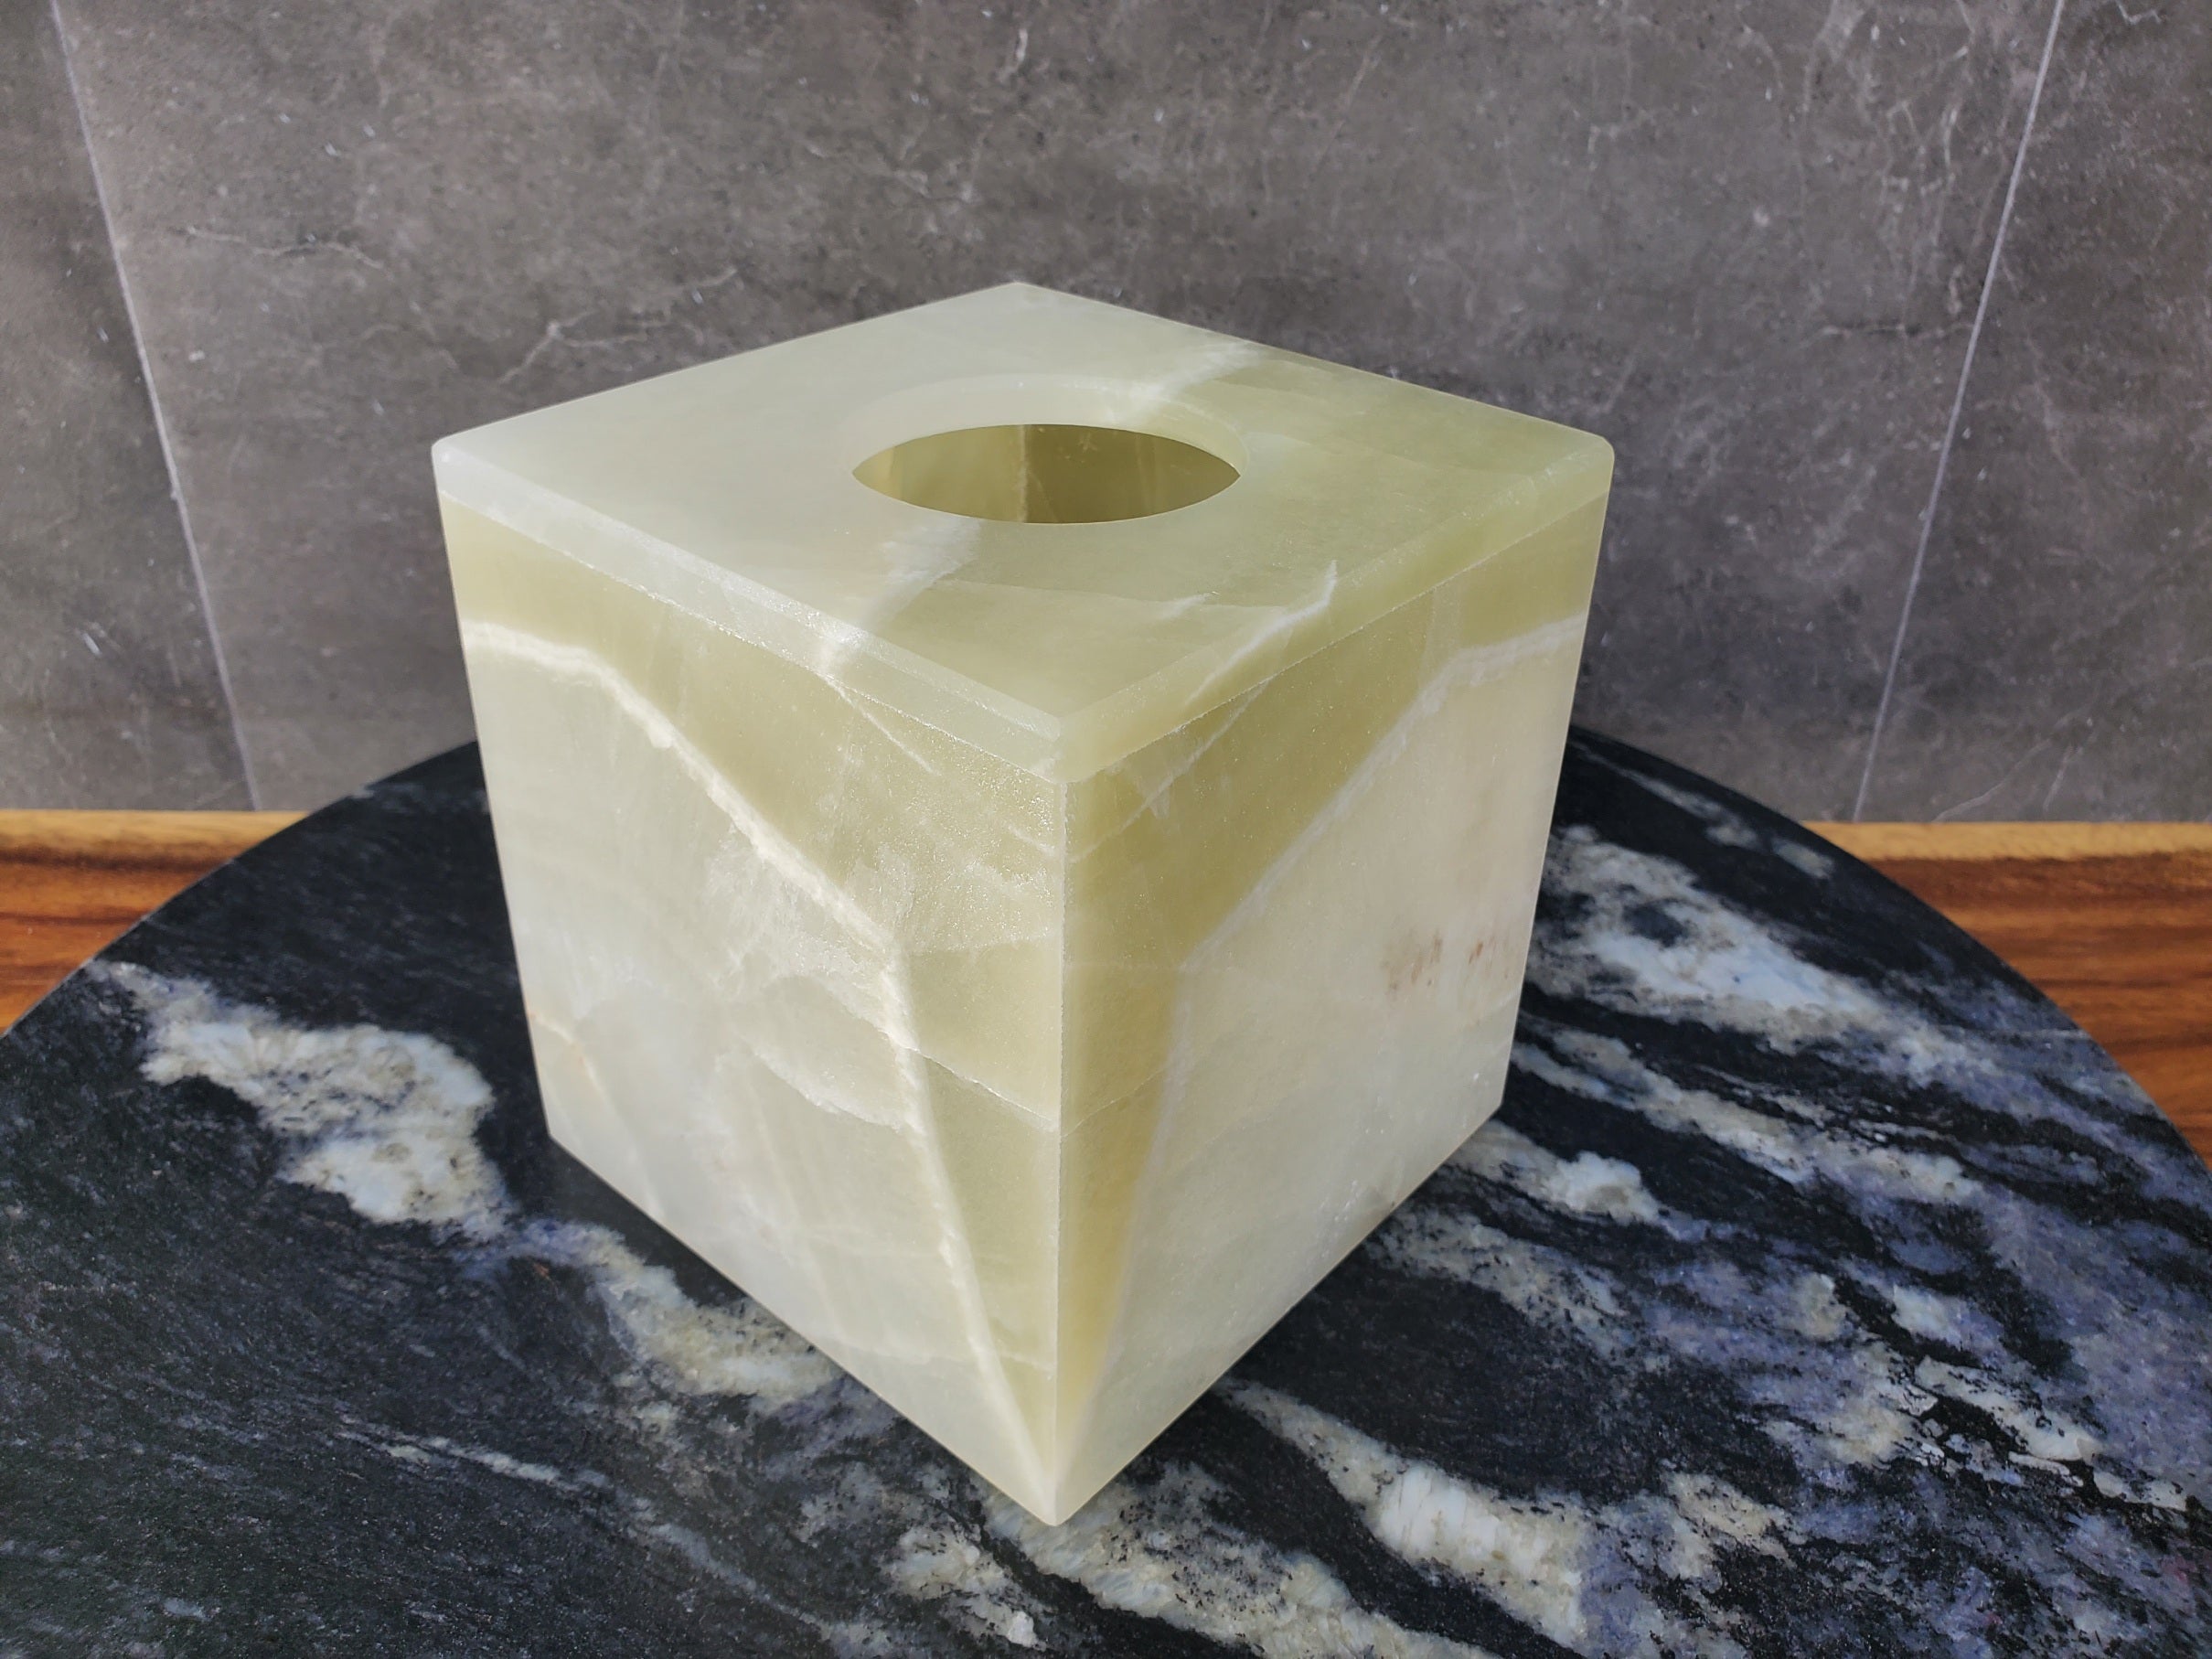 Green Onyx Stone Tissue Cover, Square. Fast Shipping, Handmade. Standard Cube Size. Buy Now at www.felipe grace.com.